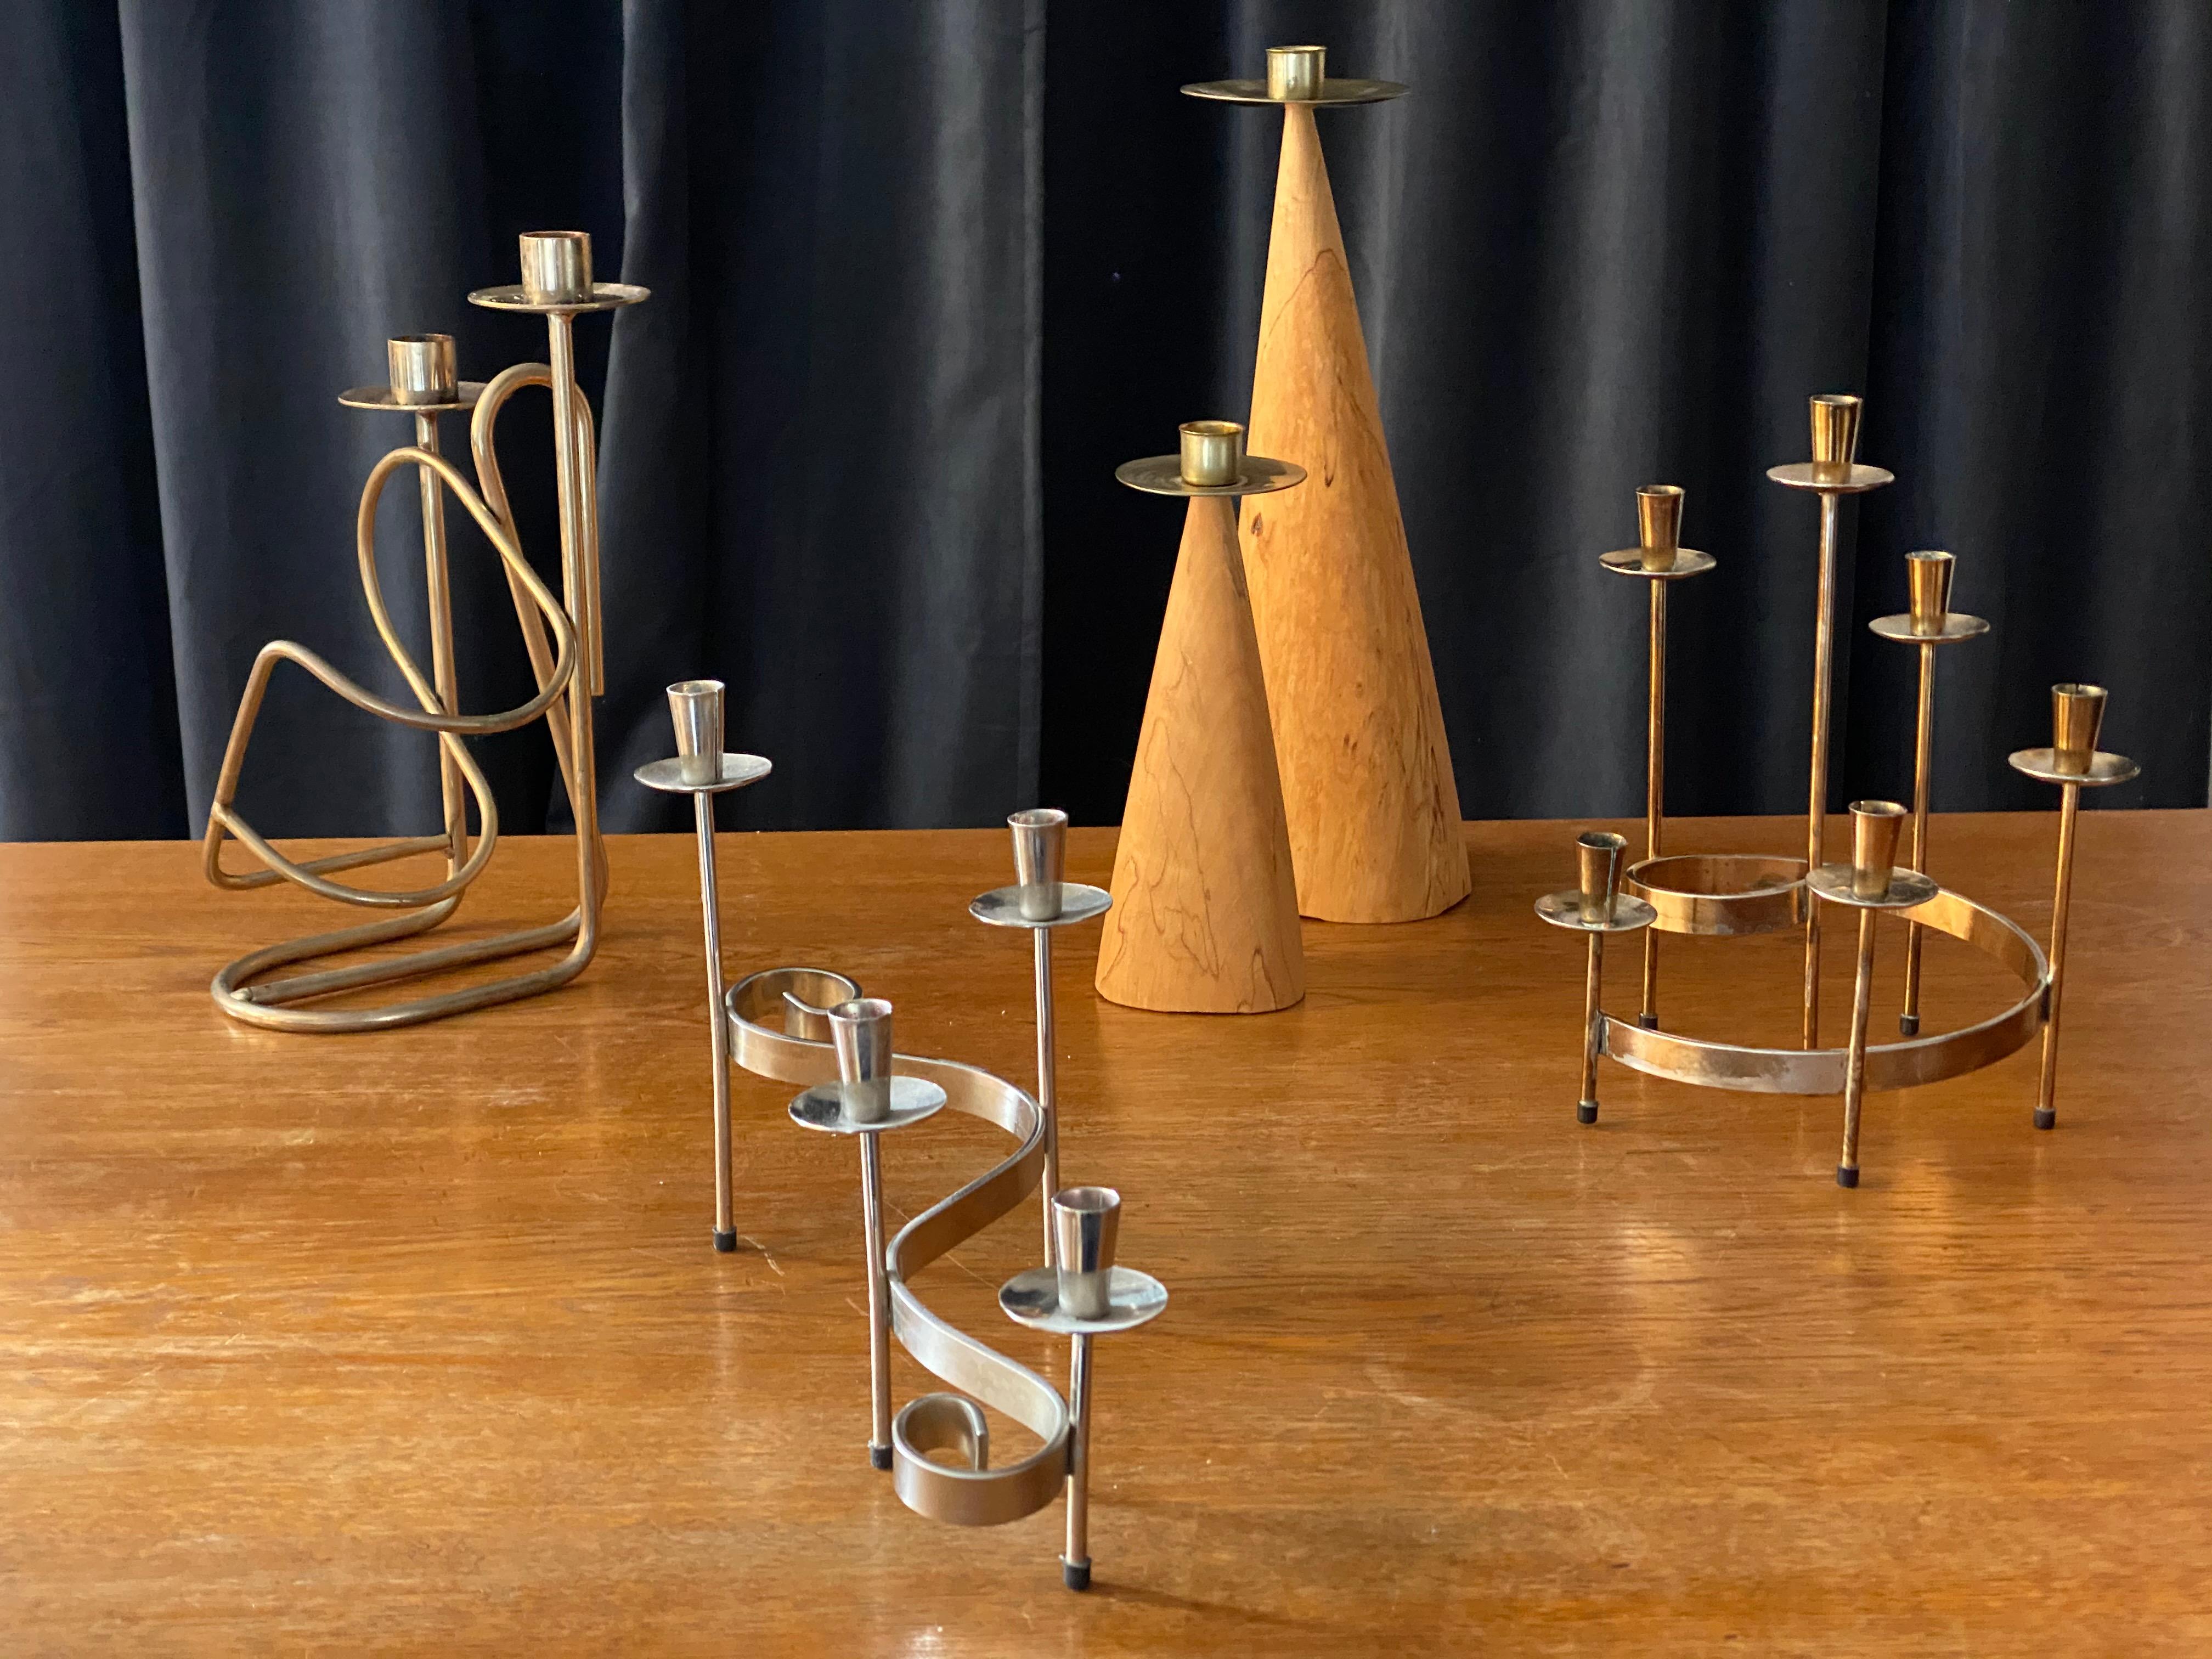 An assorted collection of 2 candlesticks and 3 candelabra, Swedish, circa 1950s-1970s. Candlesticks of studio production, circa 1970s, 2 candelabra by Gunnar Ander for Ystad Metall, circa 1950s. One candelabra also functioning as a bottle holder,